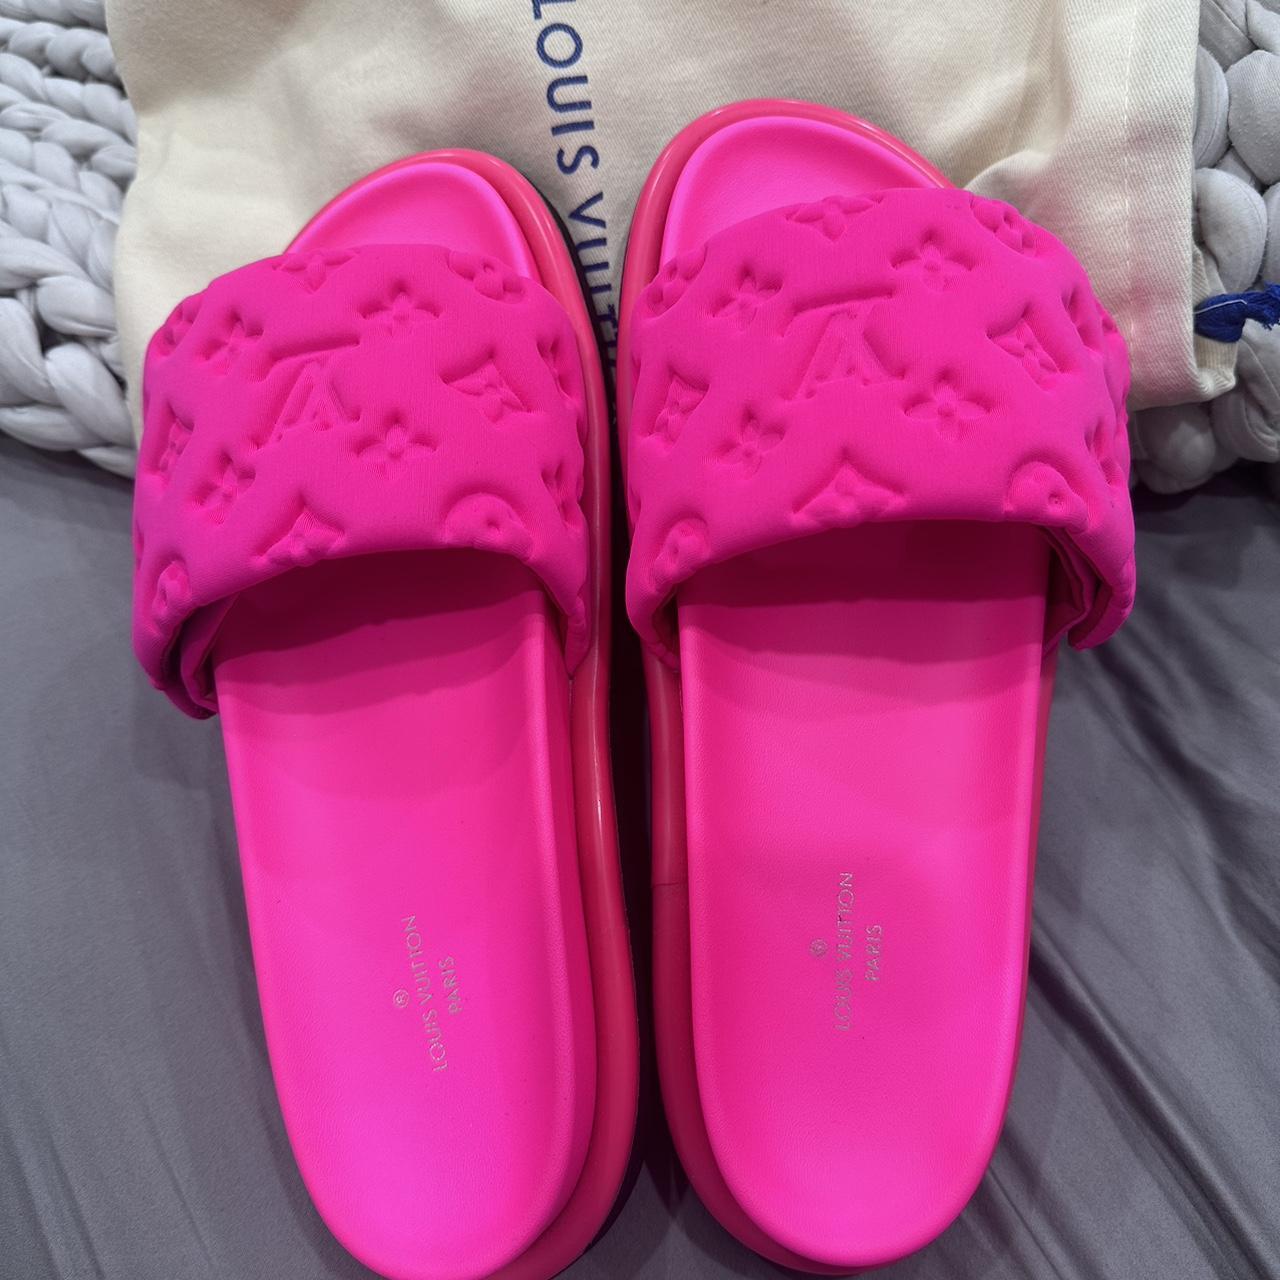 Louis Vuitton LV by The Pool Revival Flat Mule